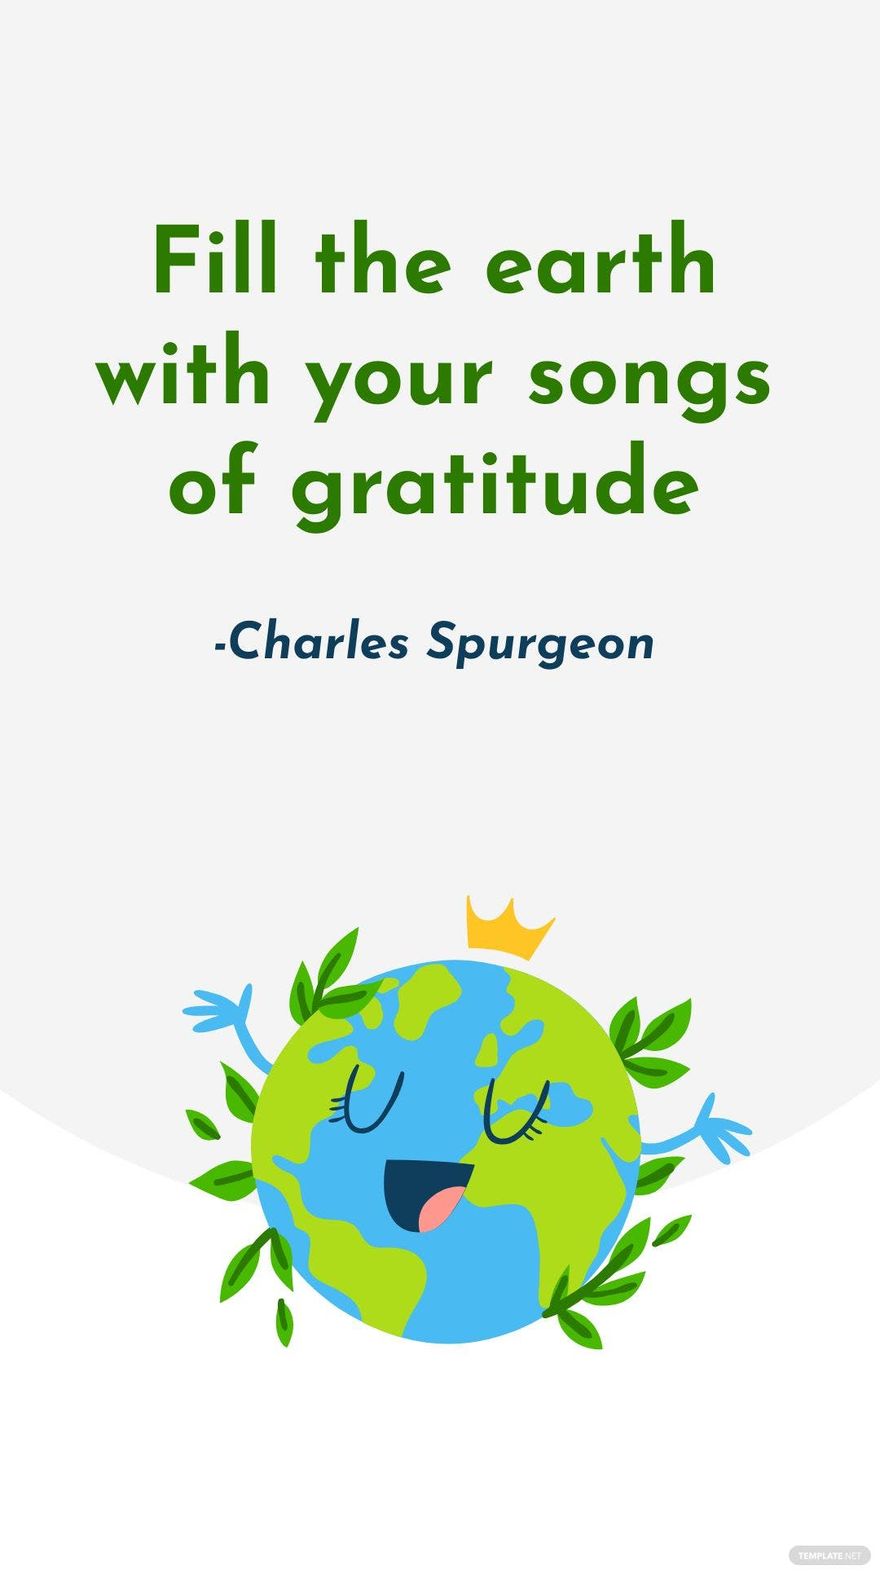 Free Charles Spurgeon - Fill the earth with your songs of gratitude